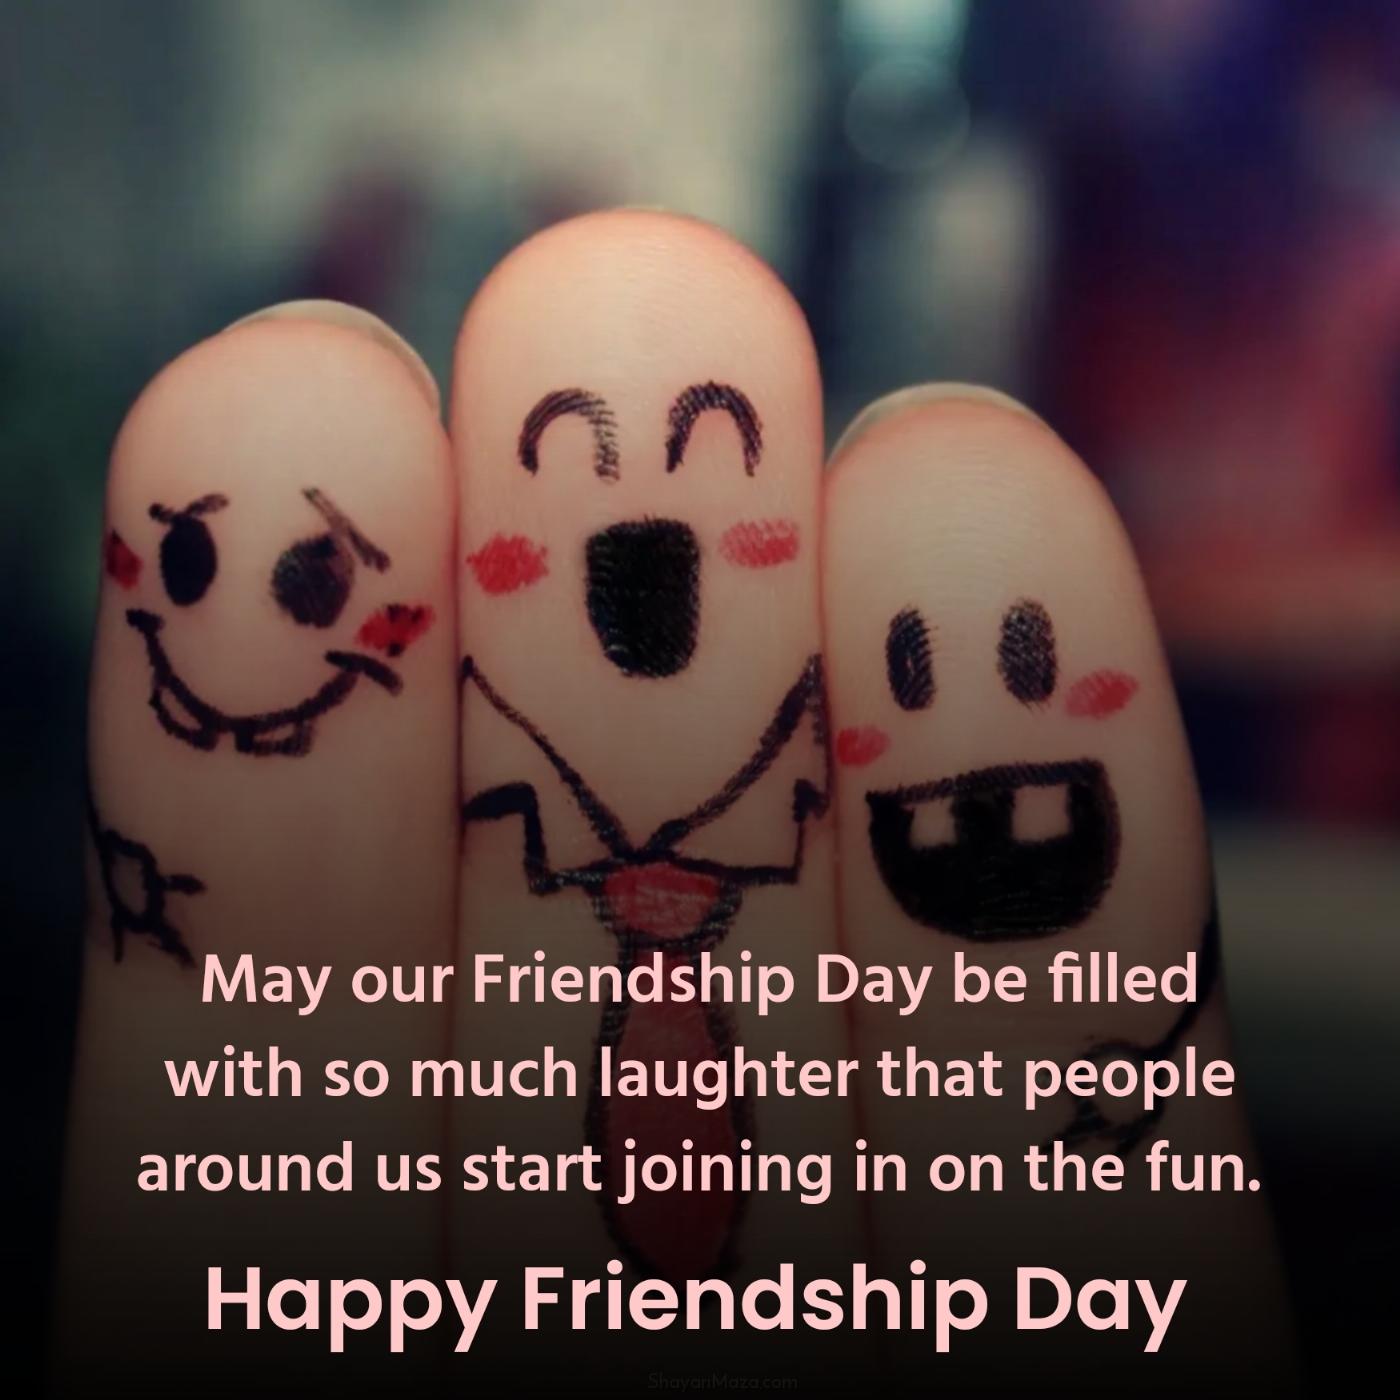 May our Friendship Day be filled with so much laughter that